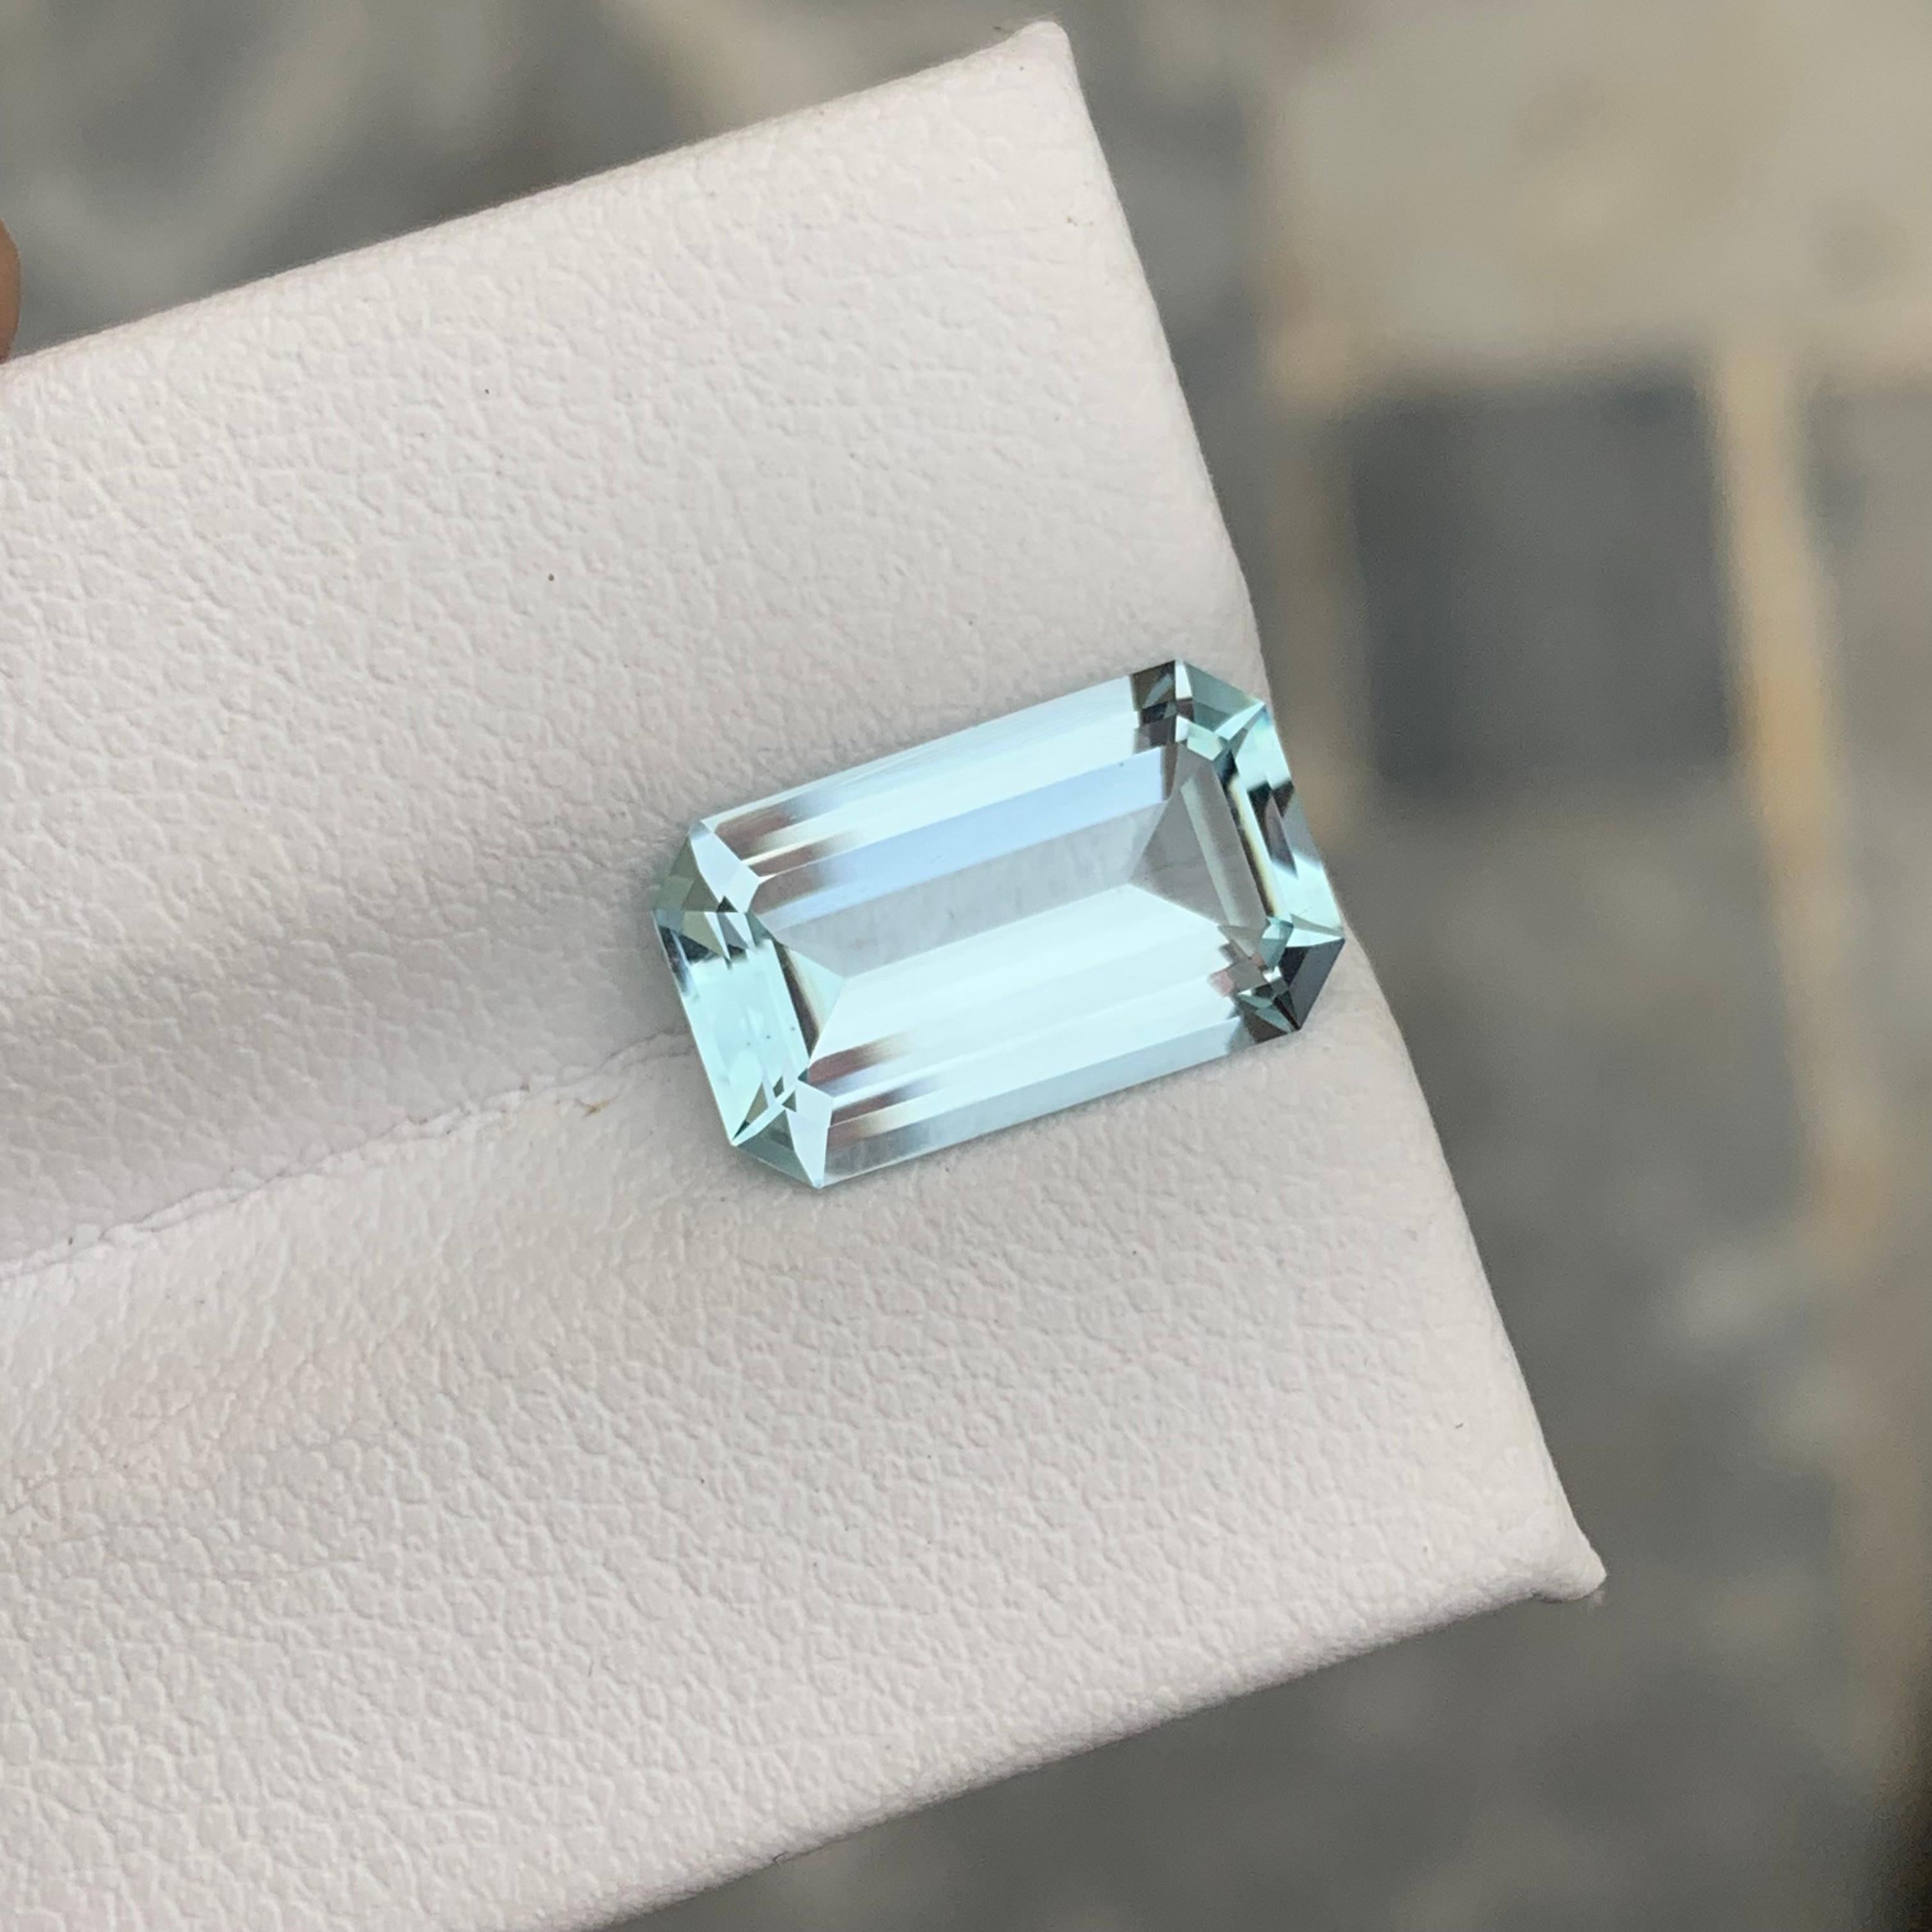 Gemstone Type : Aquamarine
Weight : 3.70 Carats
Dimensions : 13.2x7.9x4.9 mm
Clarity : Eye Clean
Origin : Pakistan
Shape: Emerald
Color: Light Blue
Certificate: On Demand
Birthstone Month: March
It has a shielding effect on your energy field and has